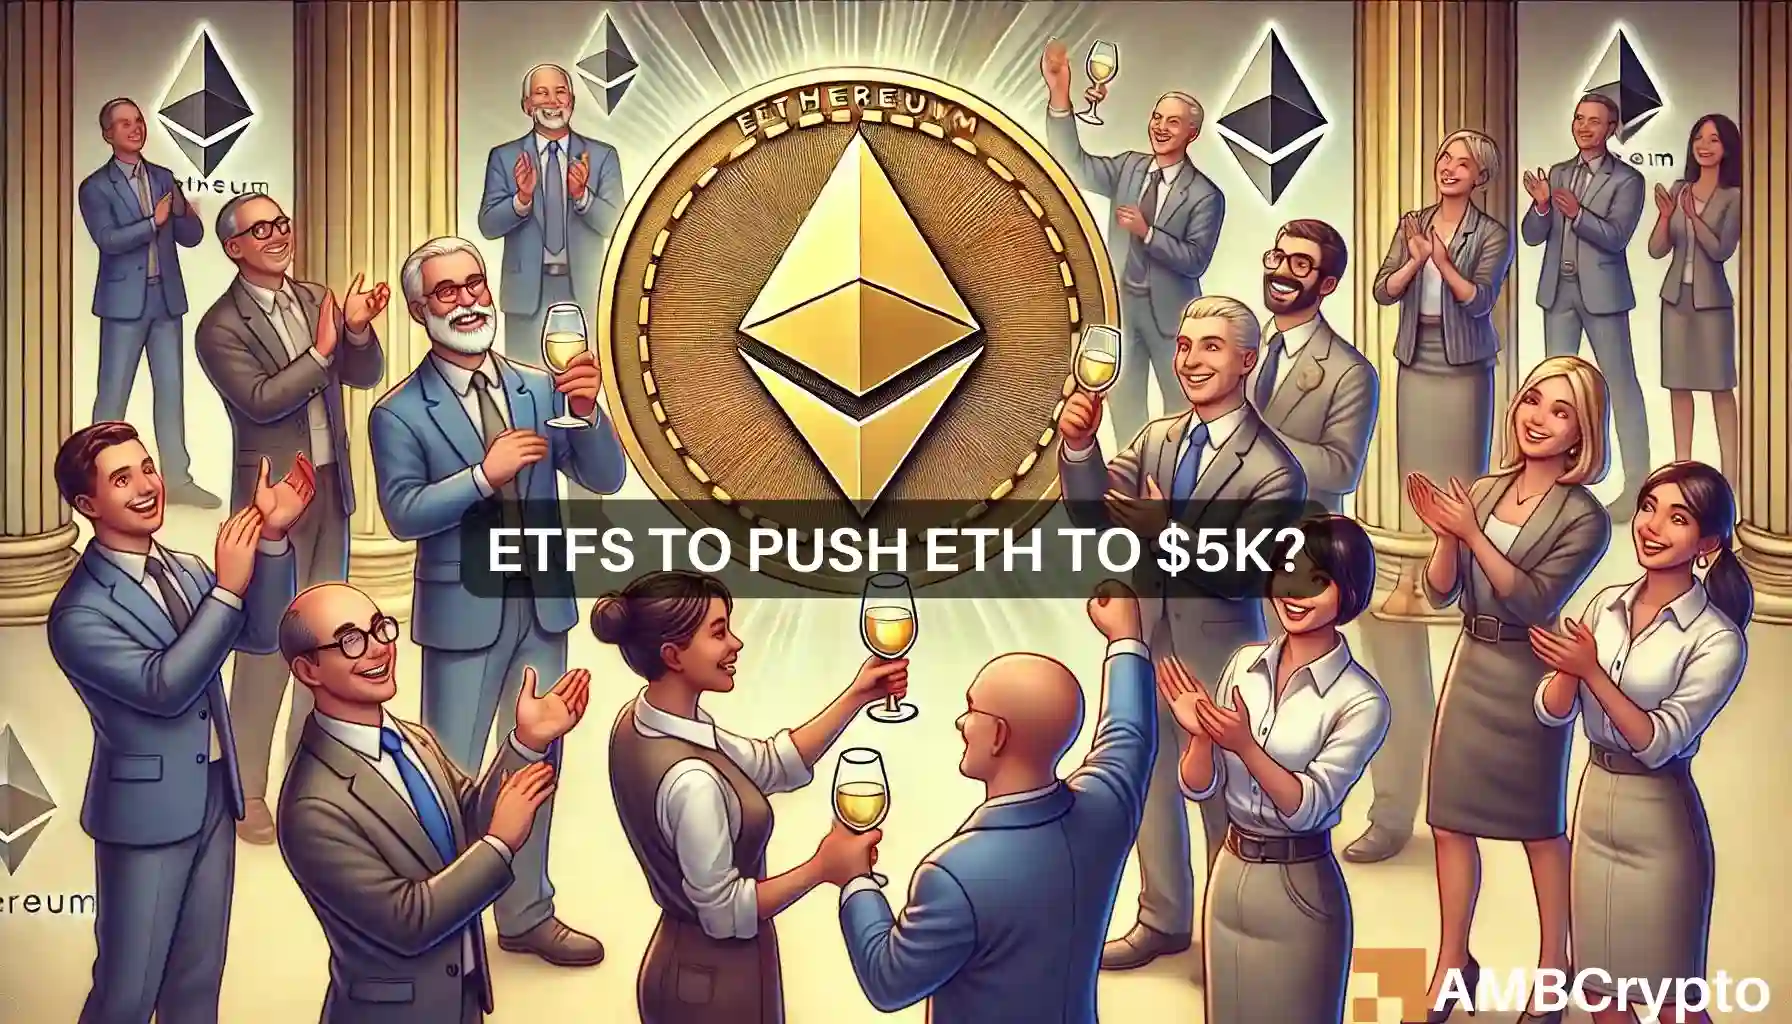 Ethereum to $5000 after Spot ETF launch? These market trends could be key...